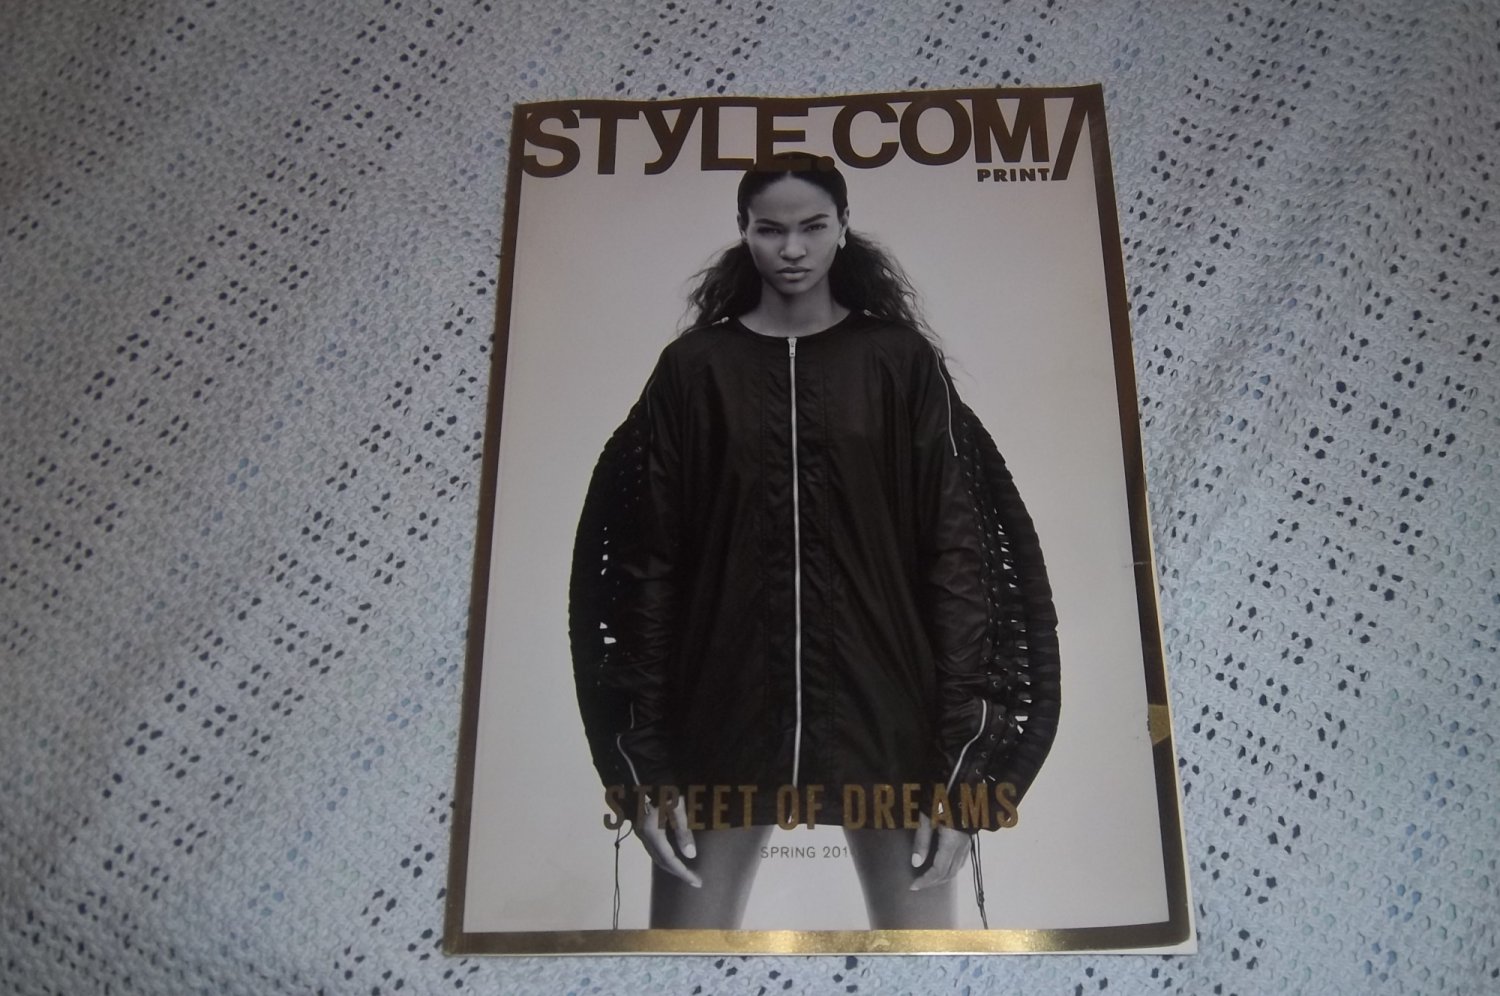 Style.com Print Magazine Spring 2014 Joan Smalls Cover Hood by Air Fashion